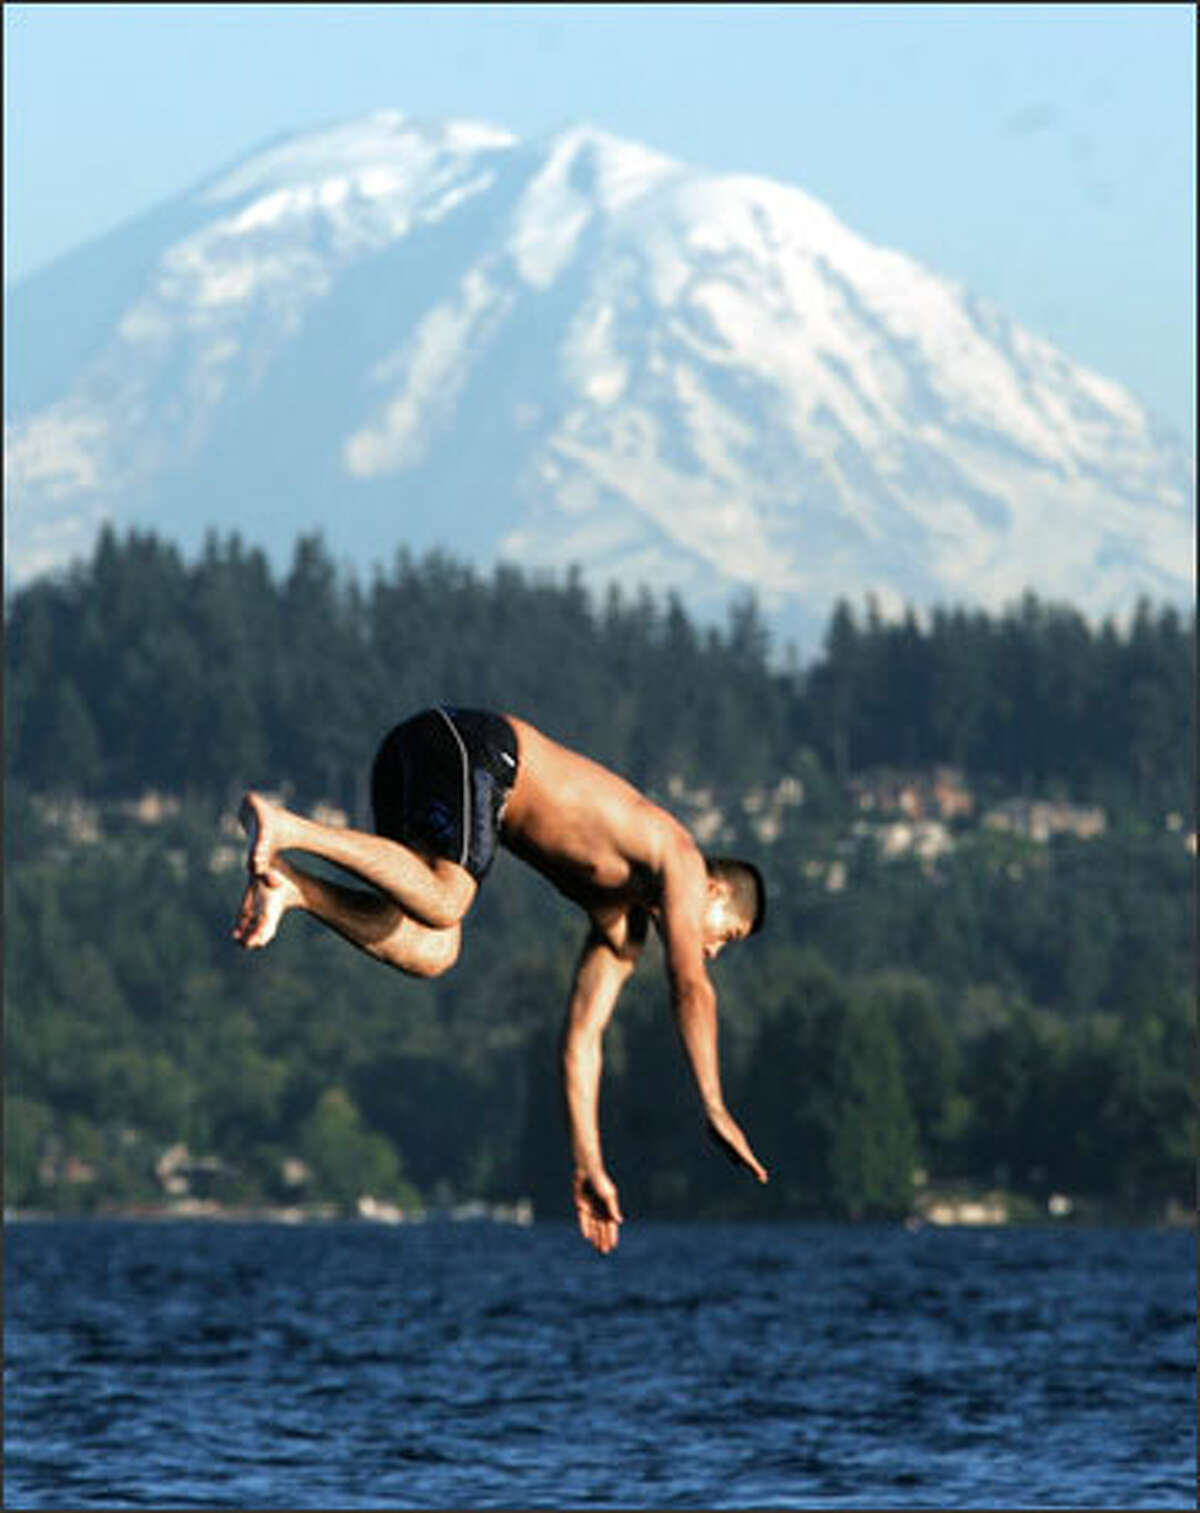 Moises Delgadillo dives off the swimming dock at Warren G. Magnuson Park in Seattle at dusk. Local temperatures hit the 80s this past week.